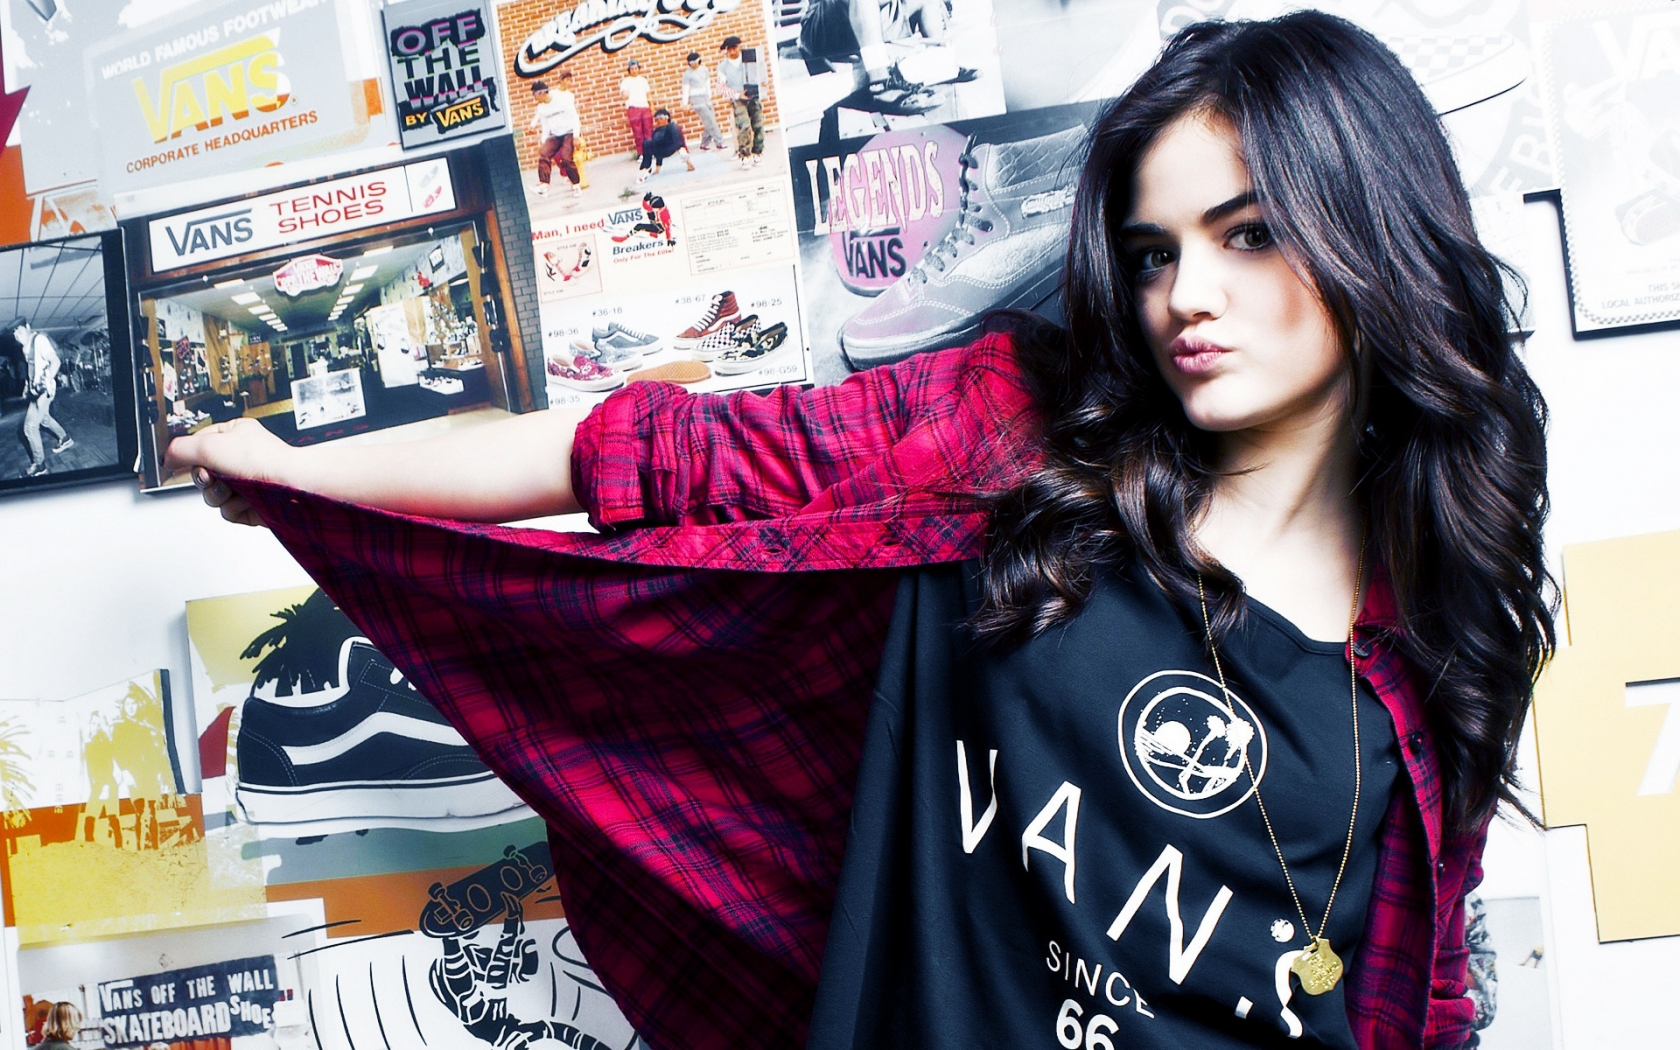 Lucy Hale for 1680 x 1050 widescreen resolution